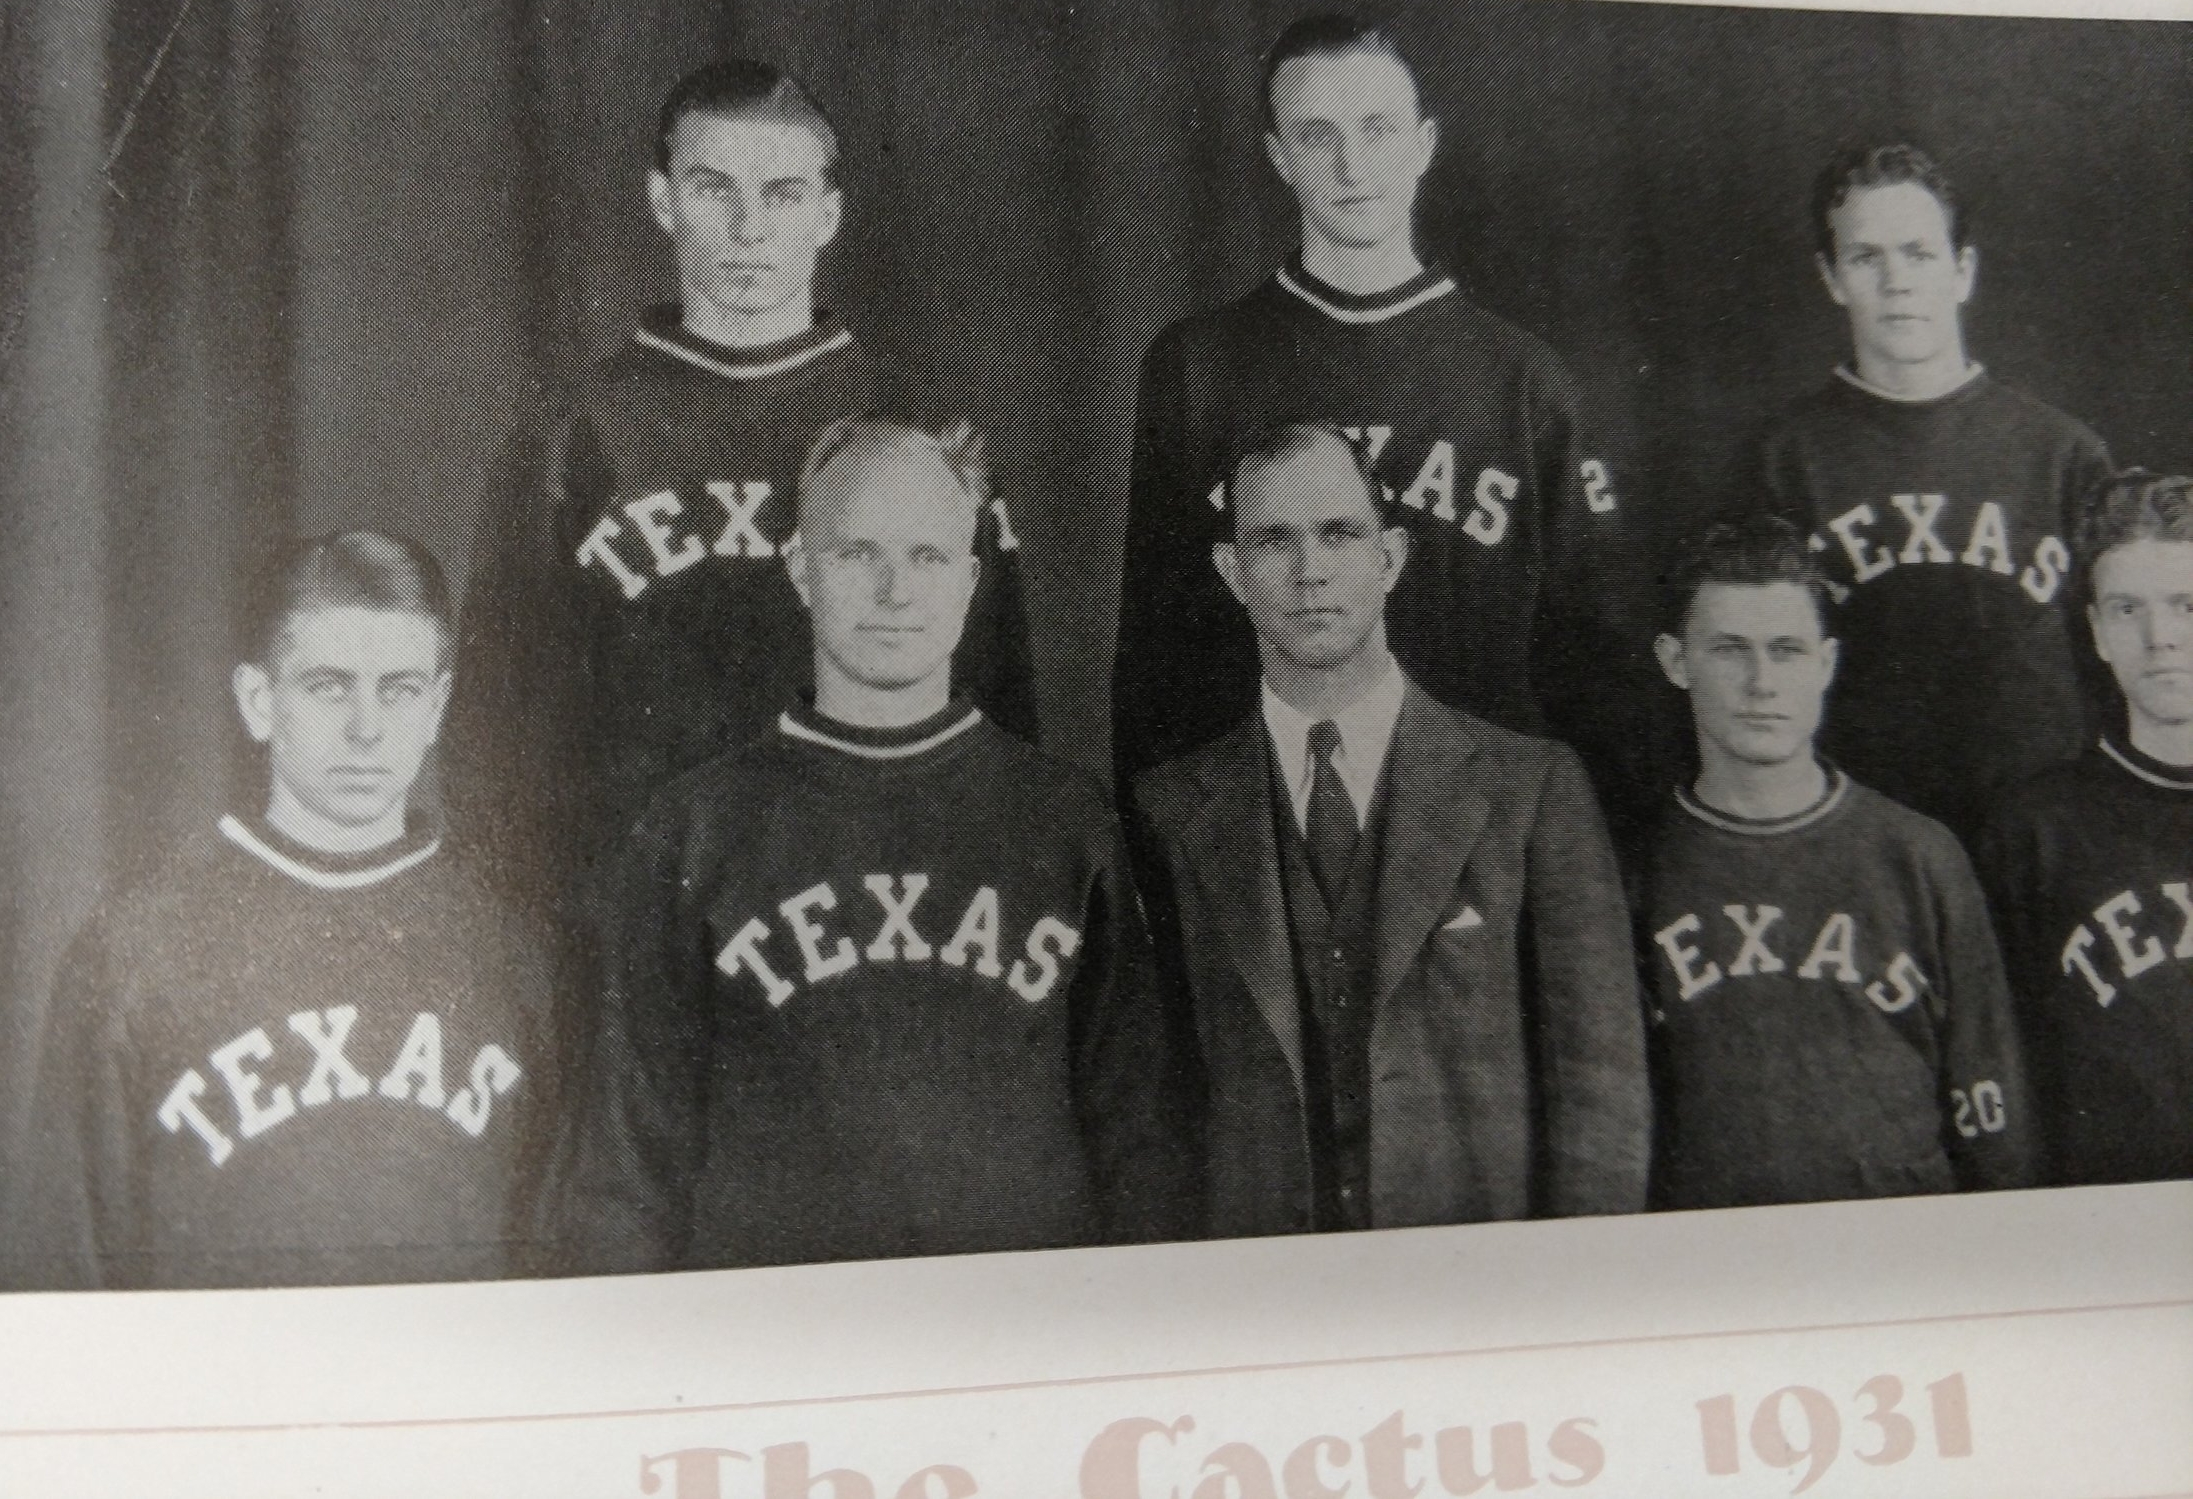 Roy is lower row in the middle. He was also the Cross Country Coach